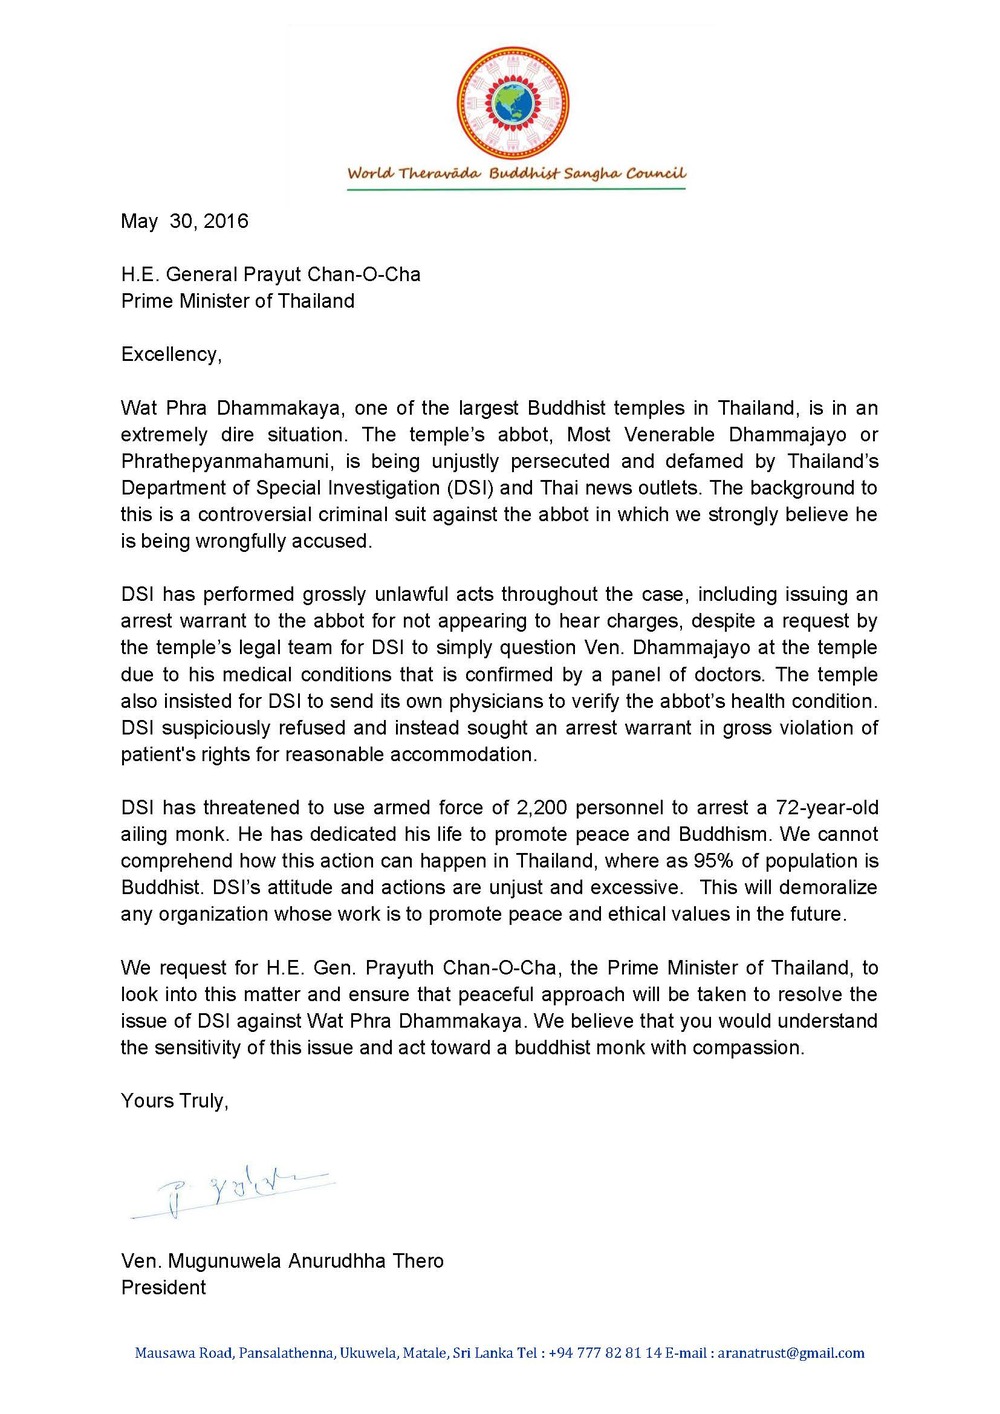 Letter to Prime Minister of Thailand from the World Theravada